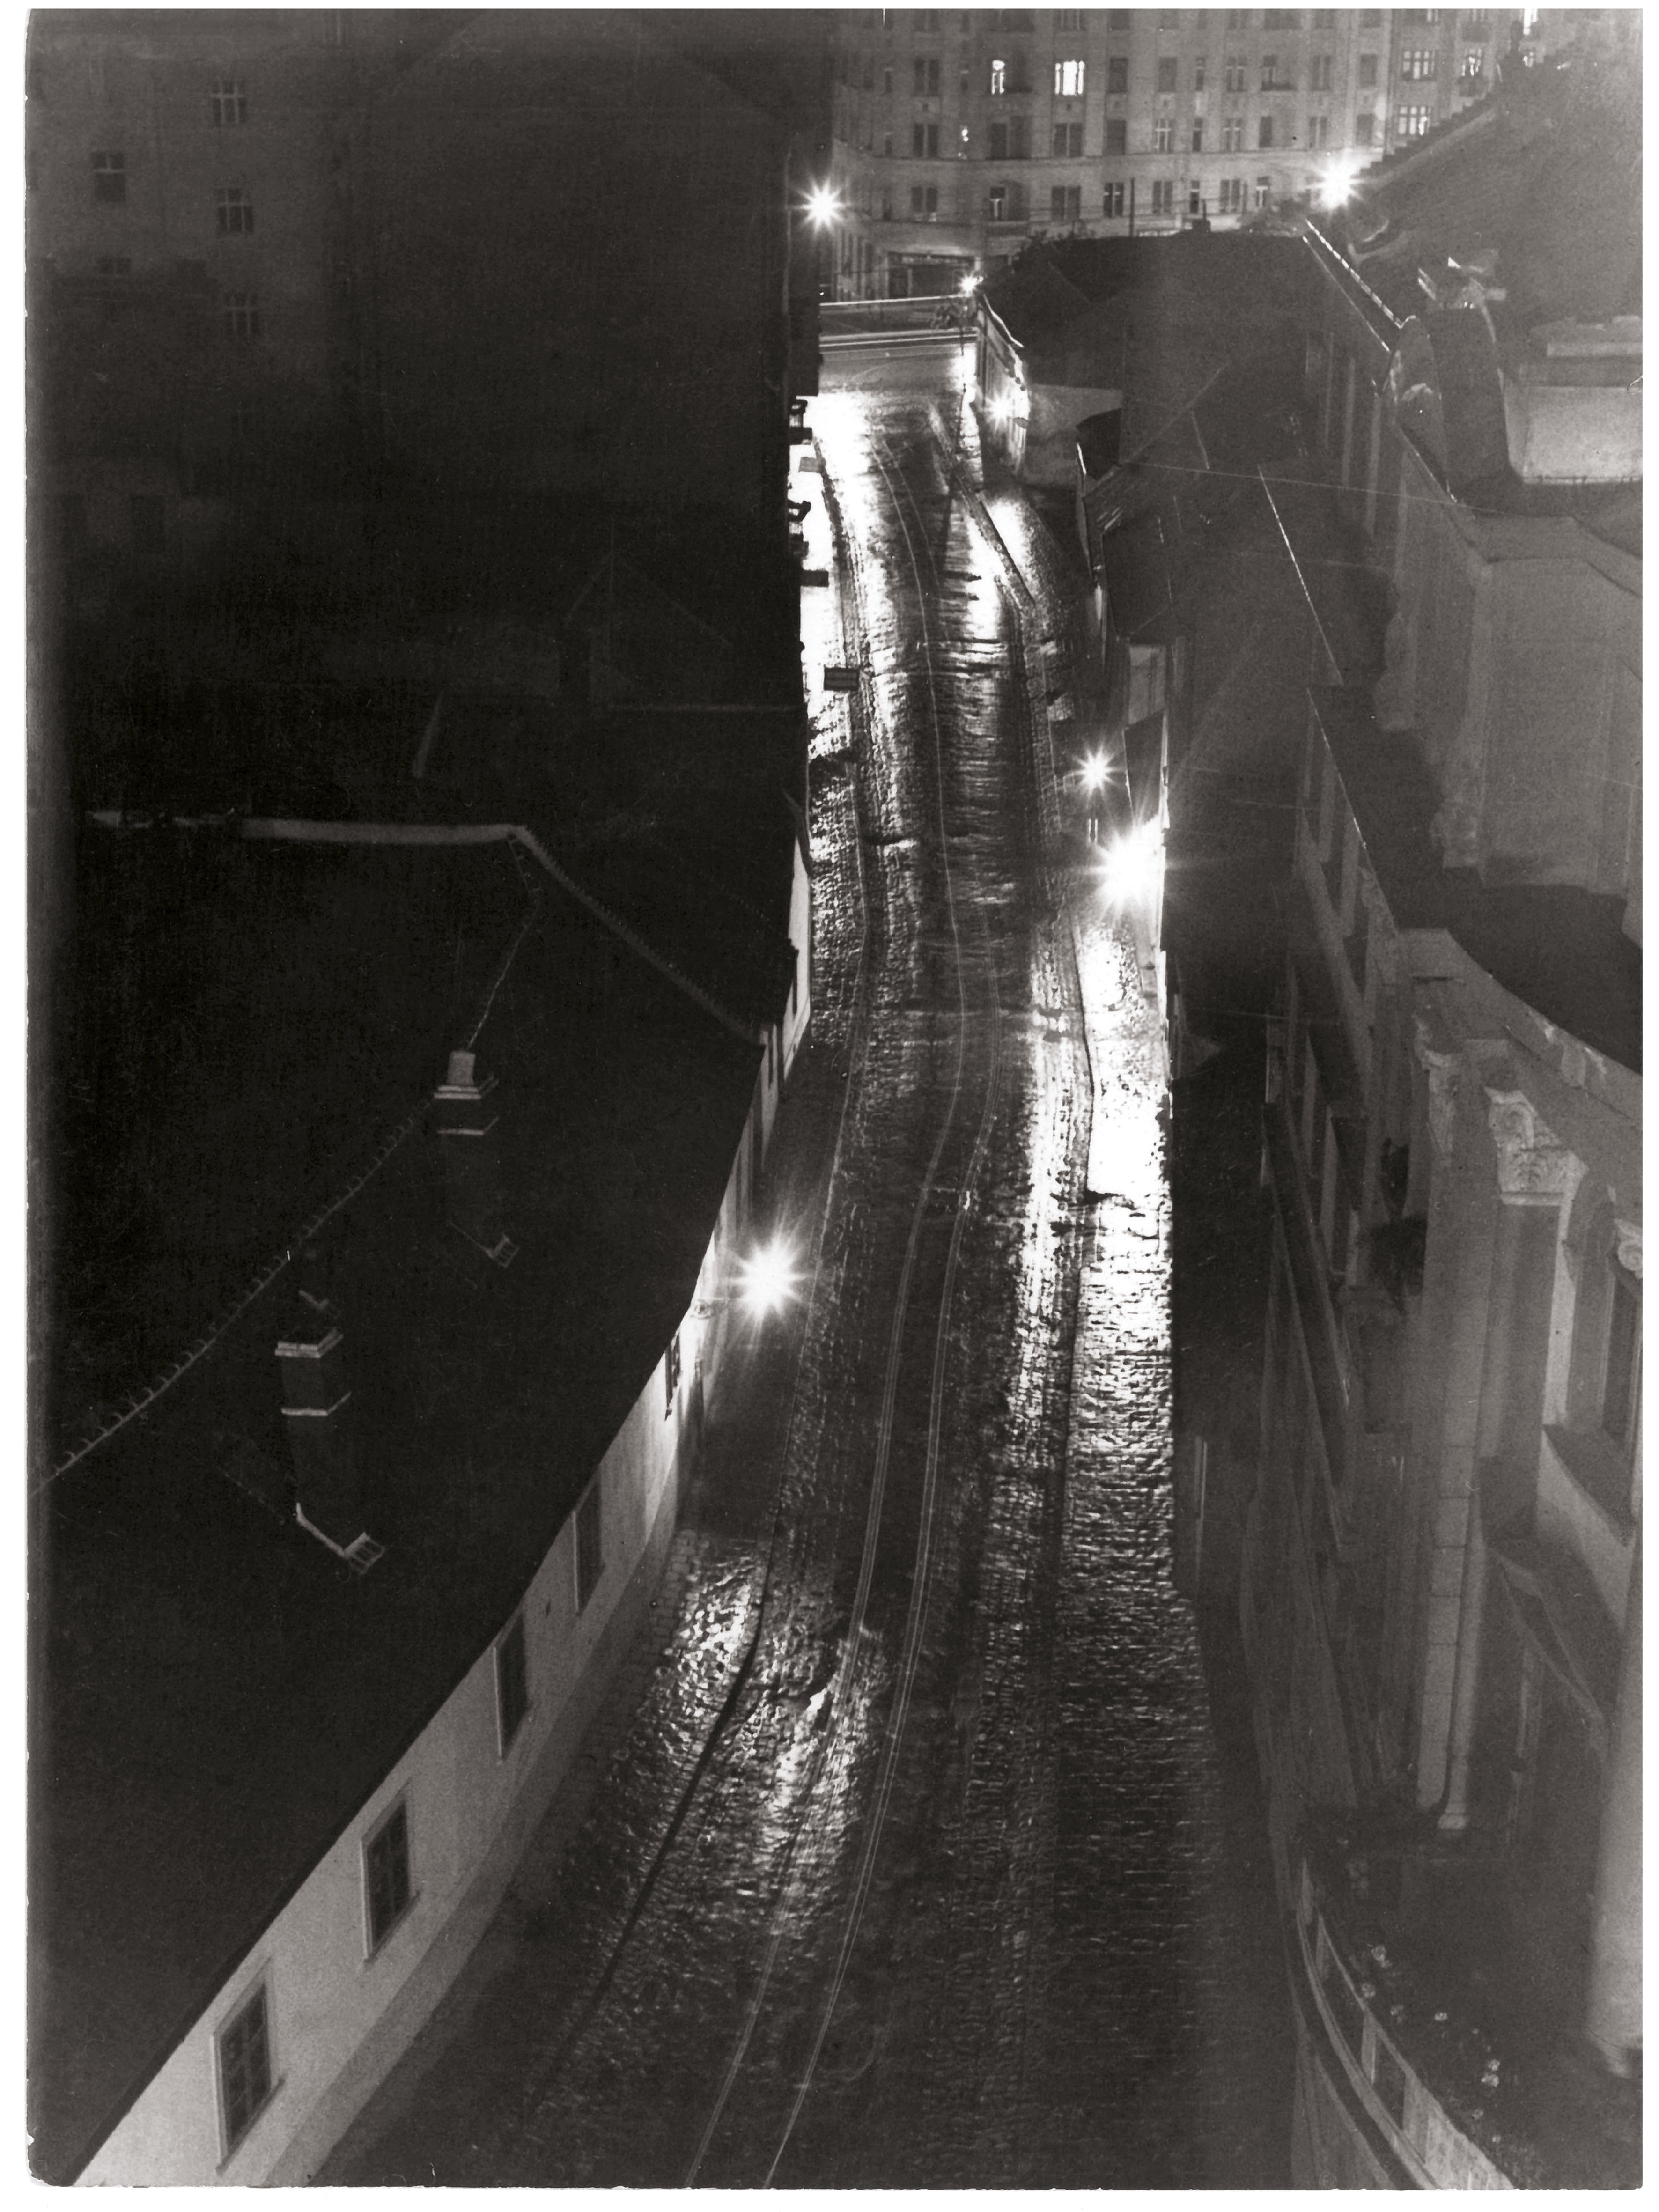 Iván Hevesy: A Buda Street at Night, in the Rain, 1934–1941, between 1934–1941, gelatin silver print, Mihály Medve Collection